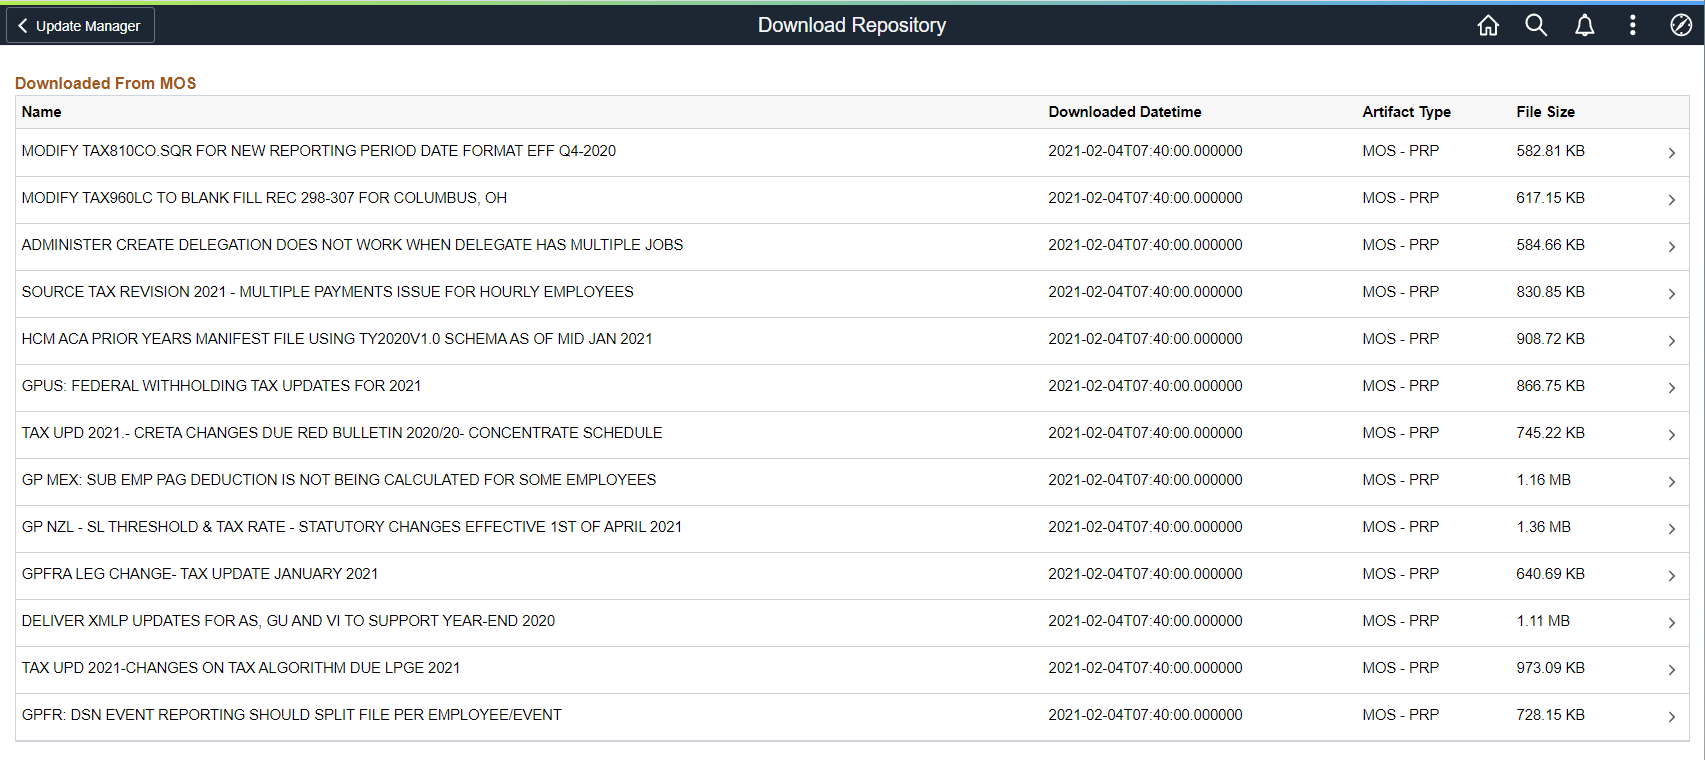 Download Repository page